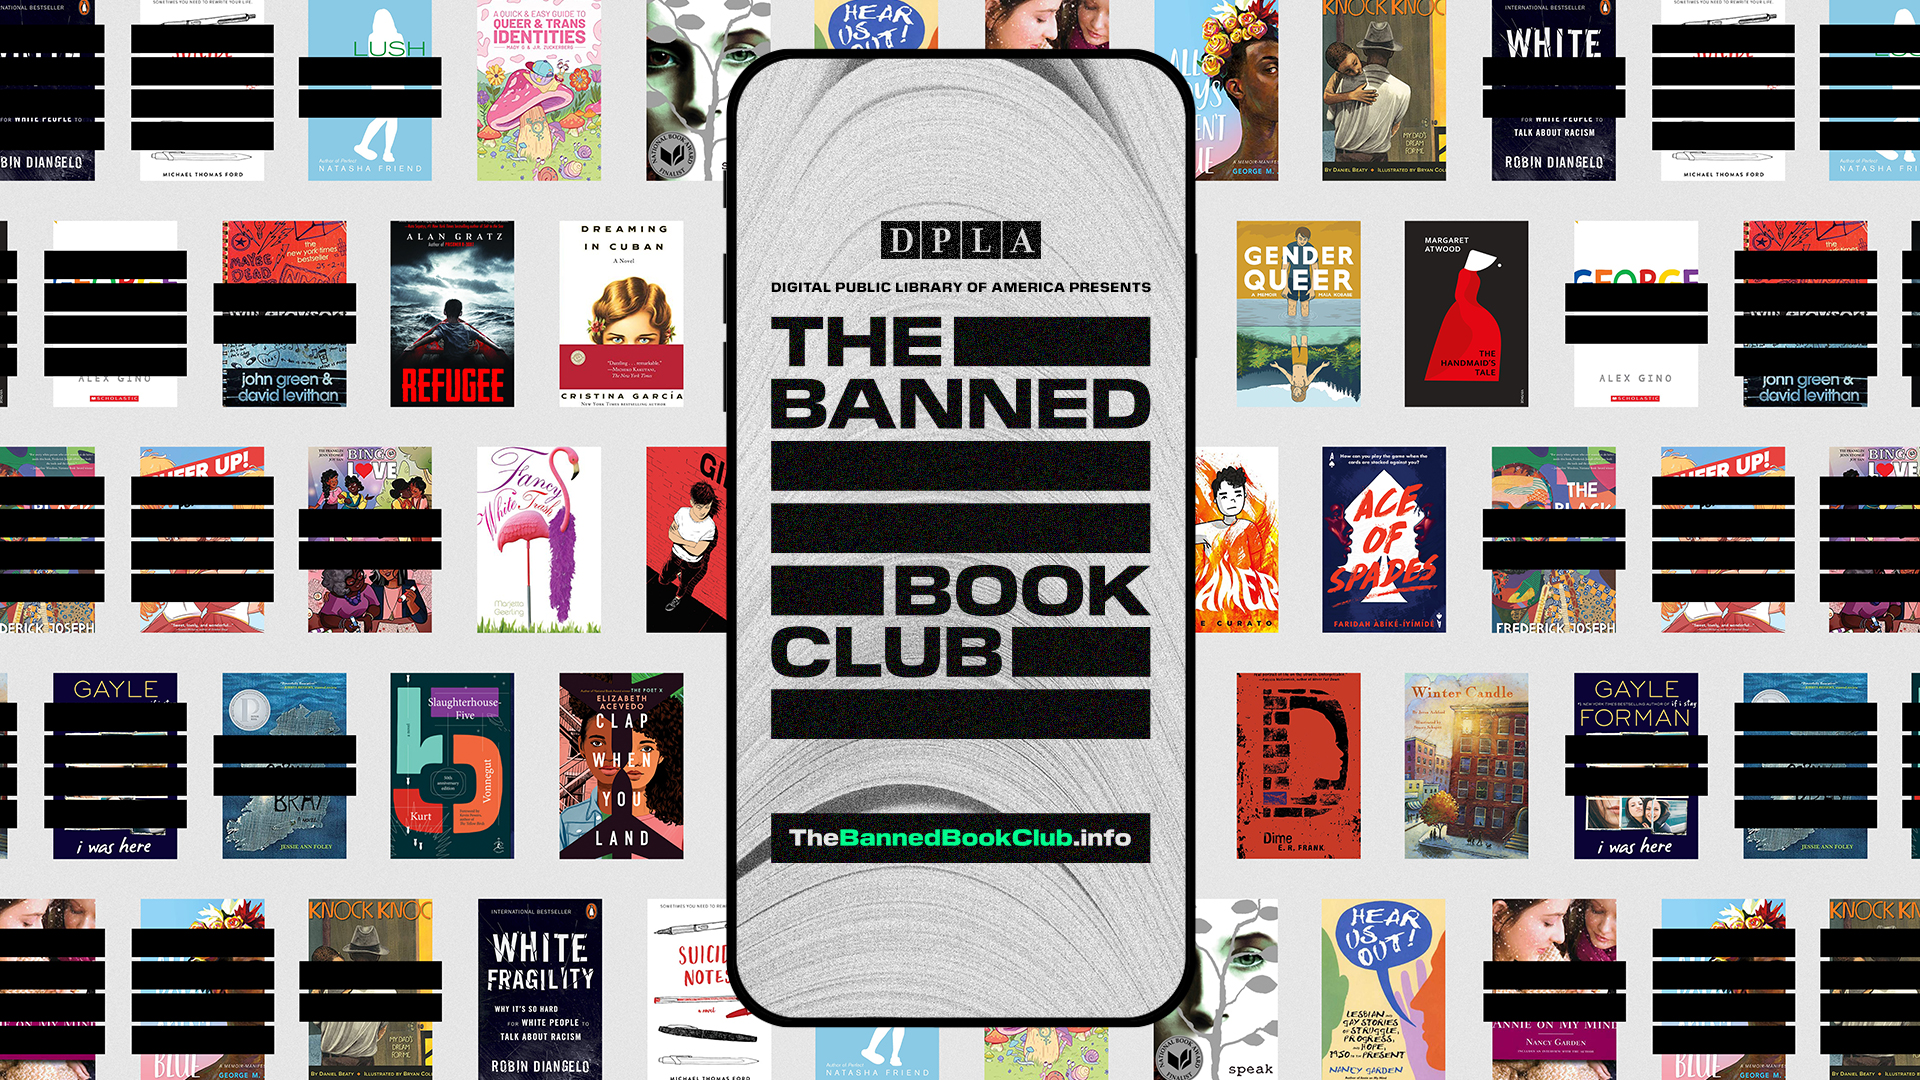 The Banned Book Club on a smart phone